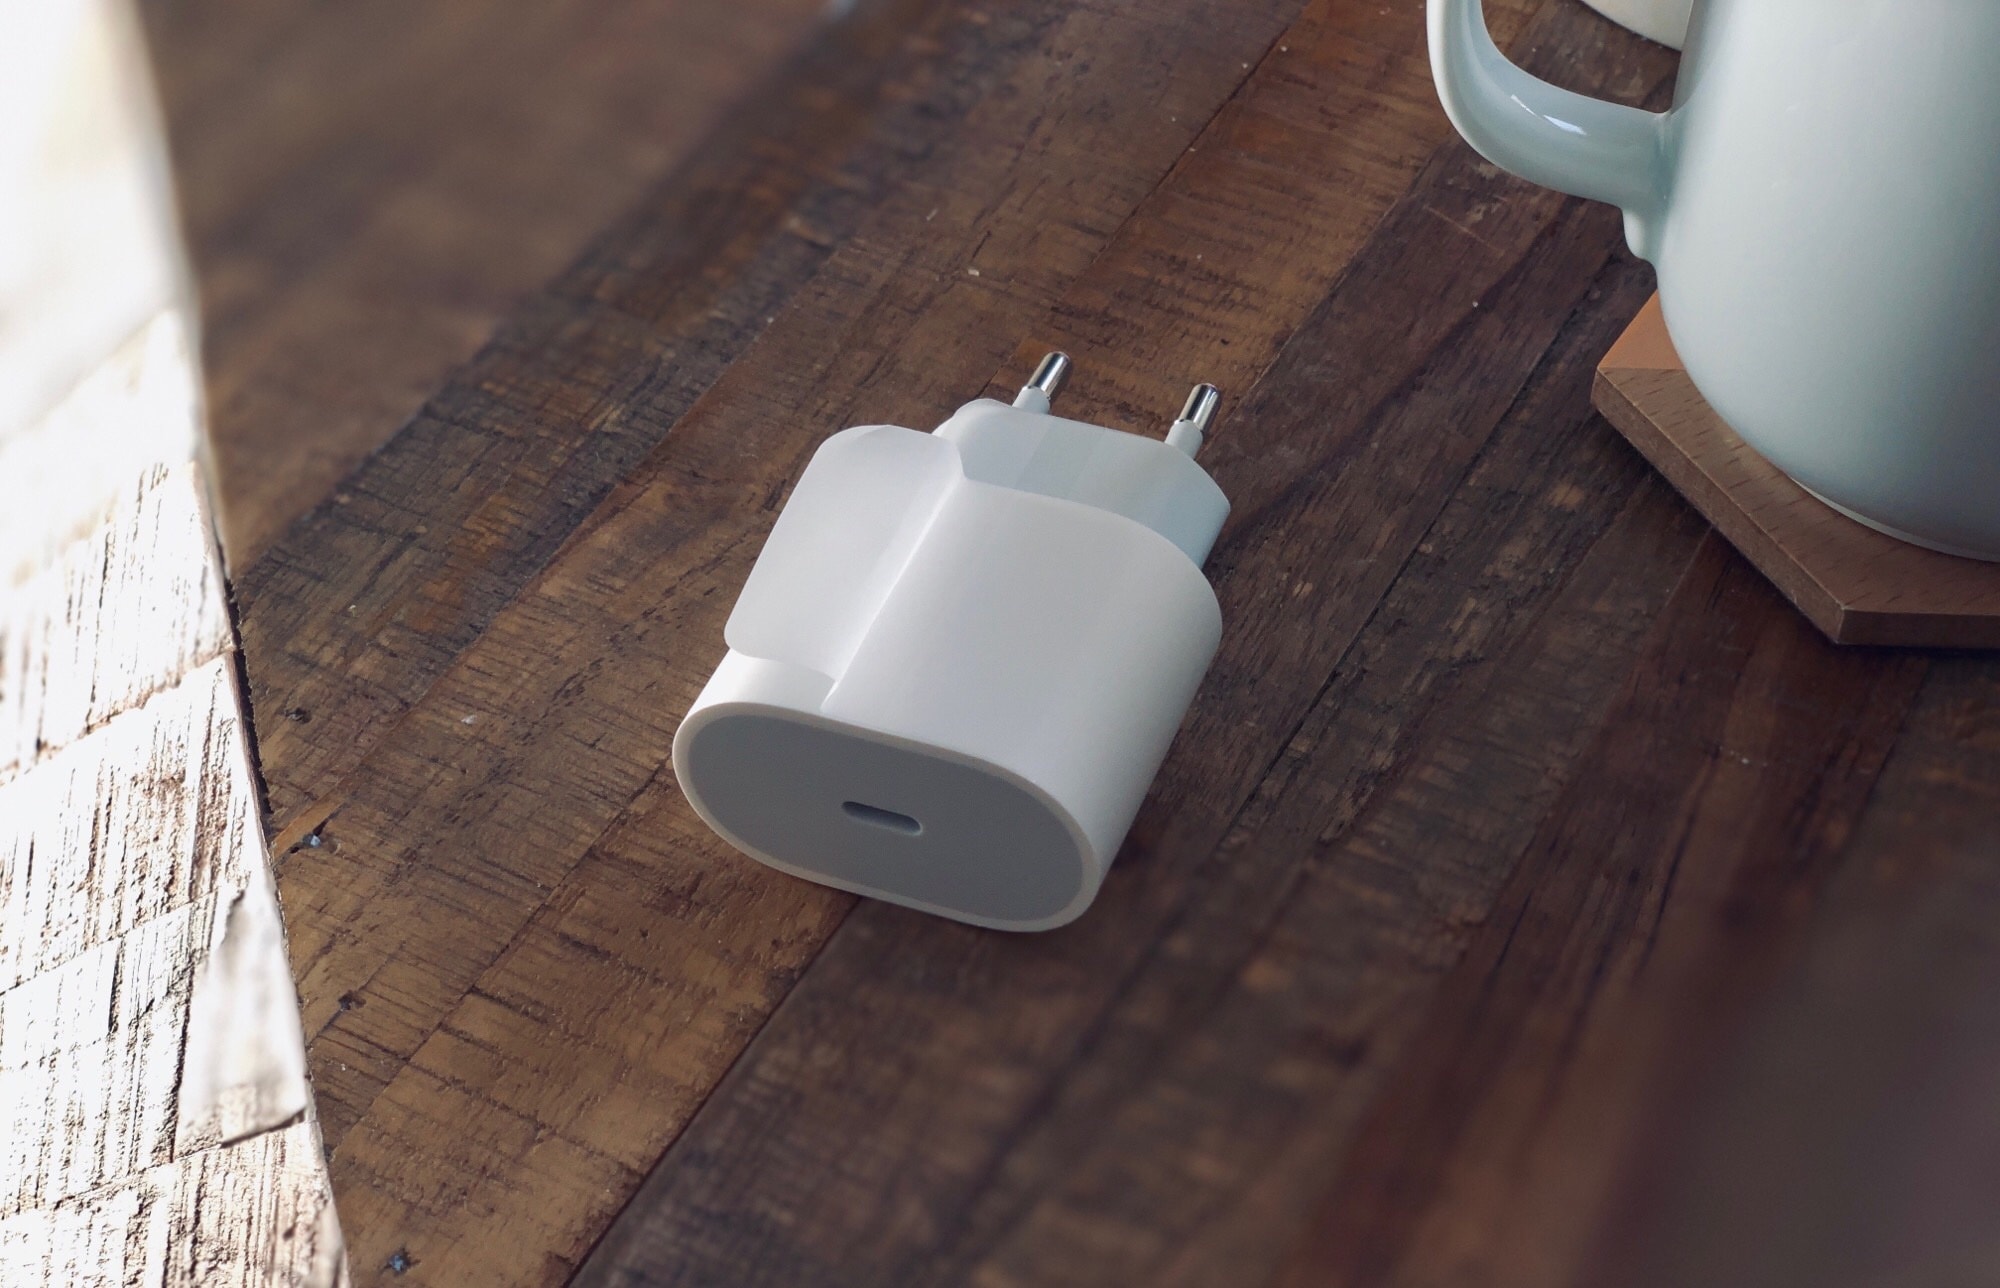 Apple's iPad USB-C charger works just fine with the iPhone -- if you have the right cable